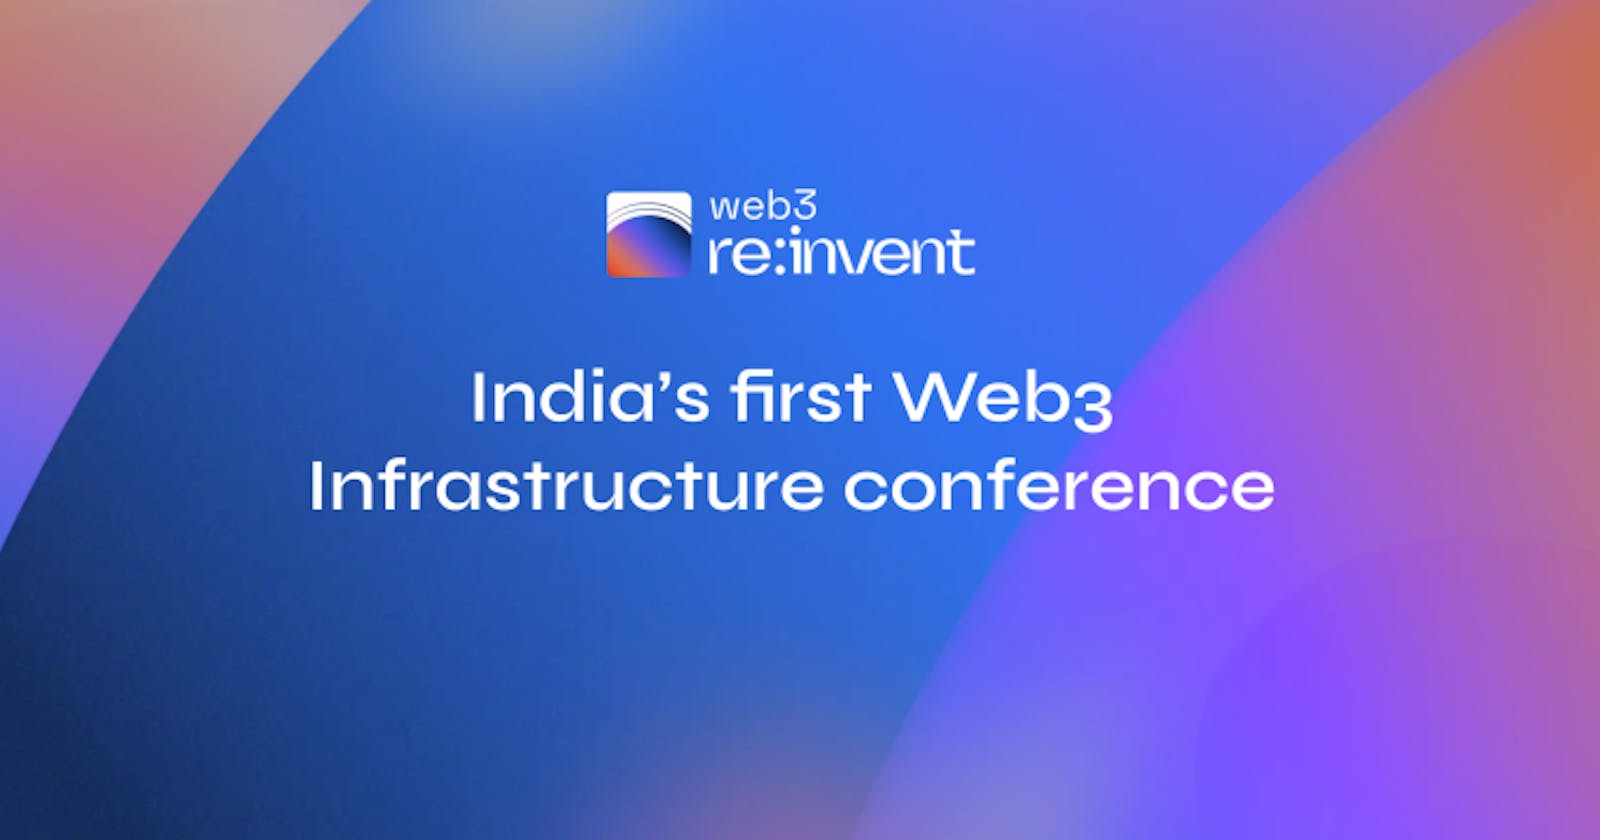 web3re:invent Spheron Network Presents India’s First Web3 Infrastructure Conference